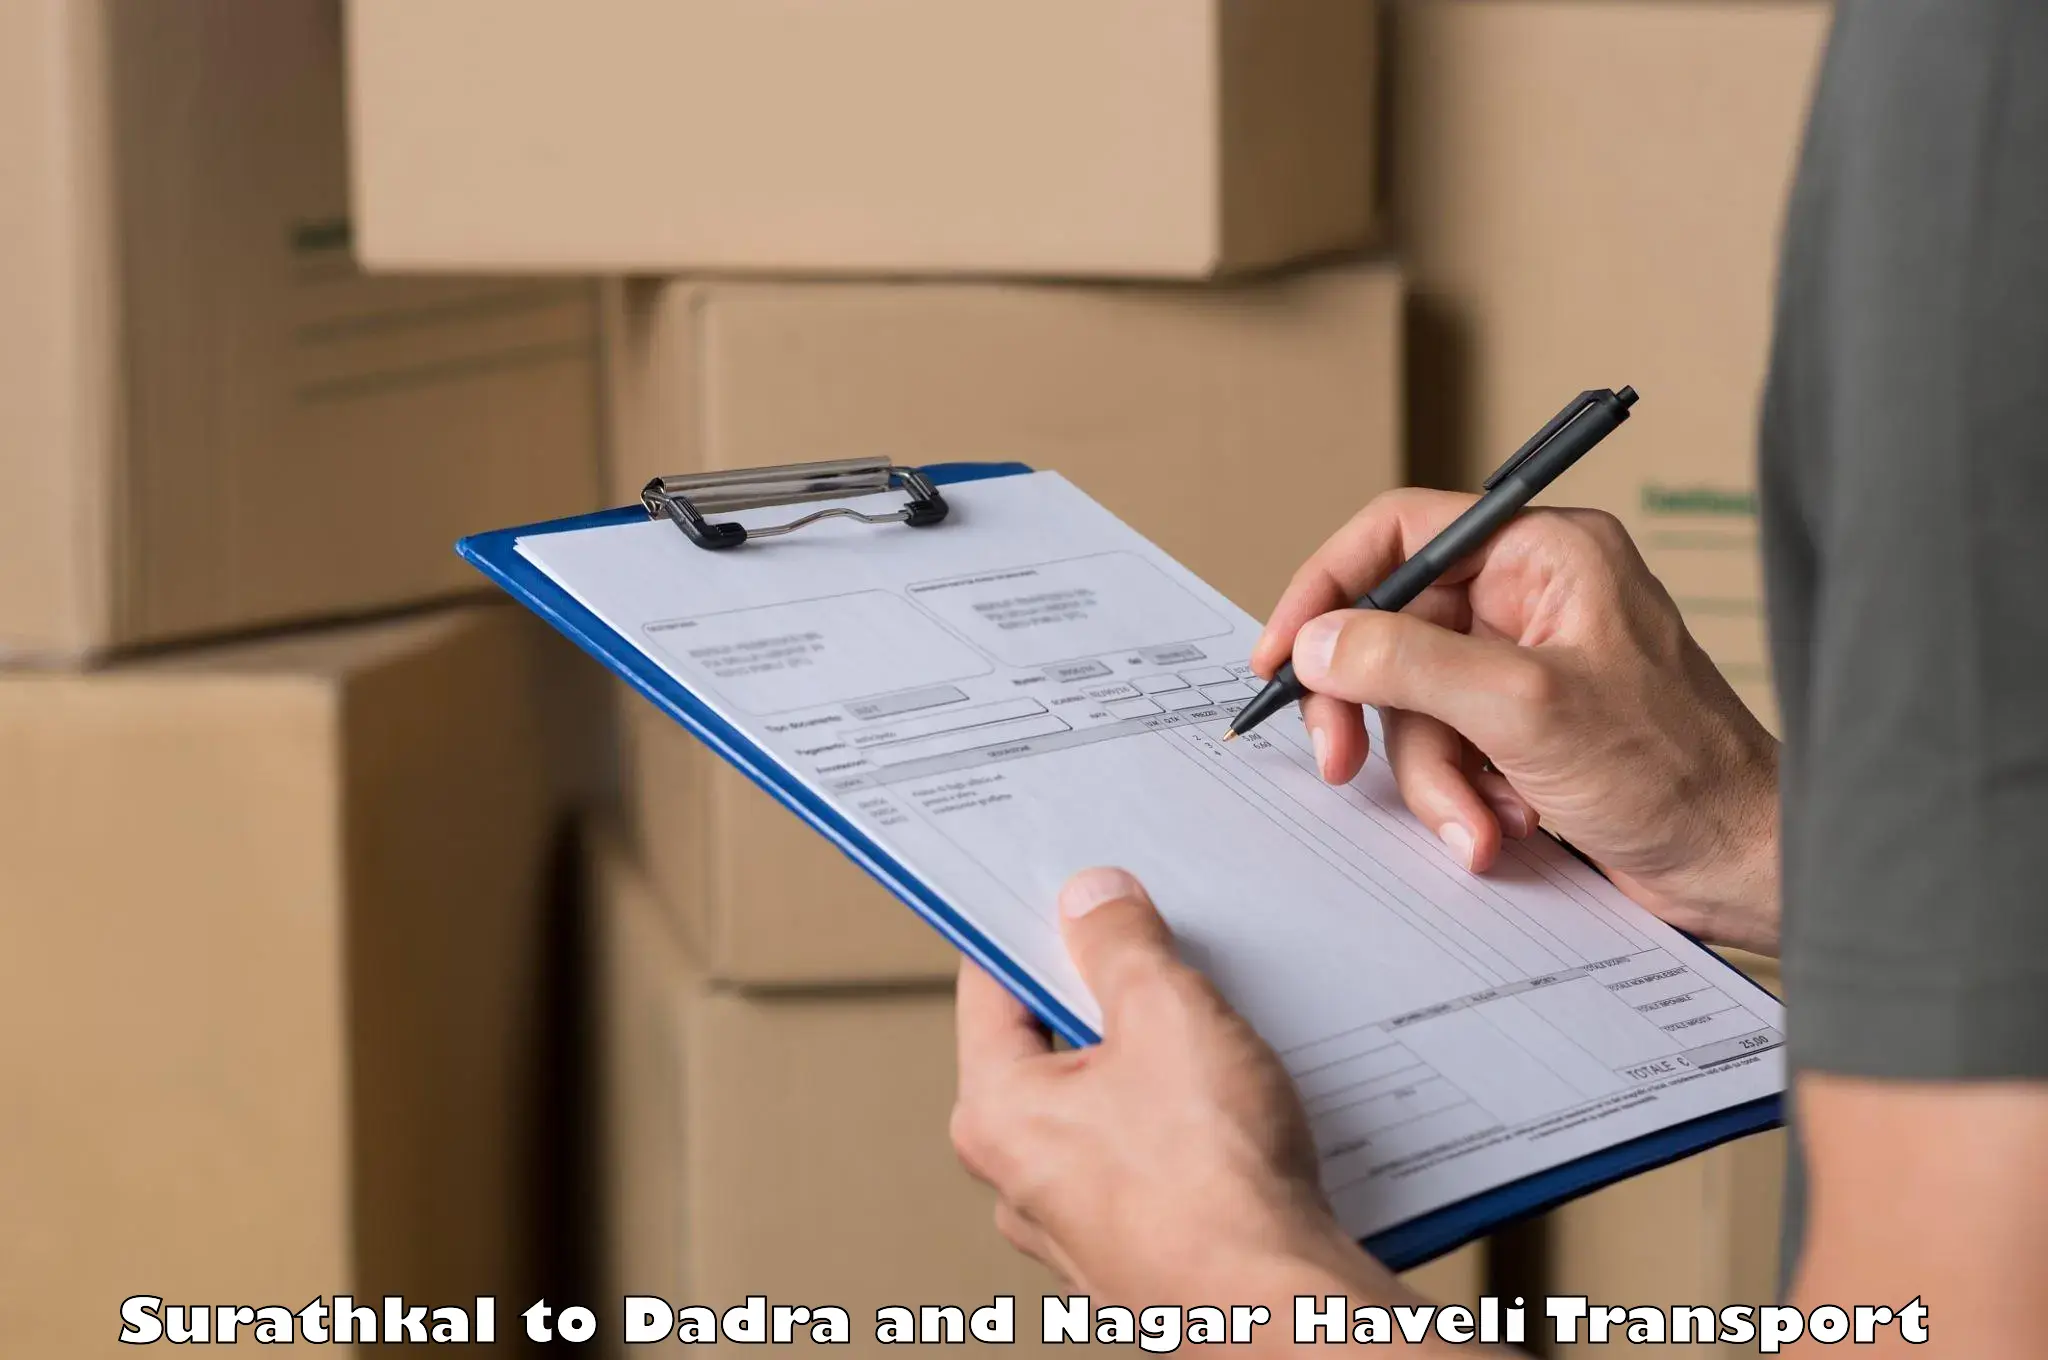 Domestic transport services Surathkal to Dadra and Nagar Haveli